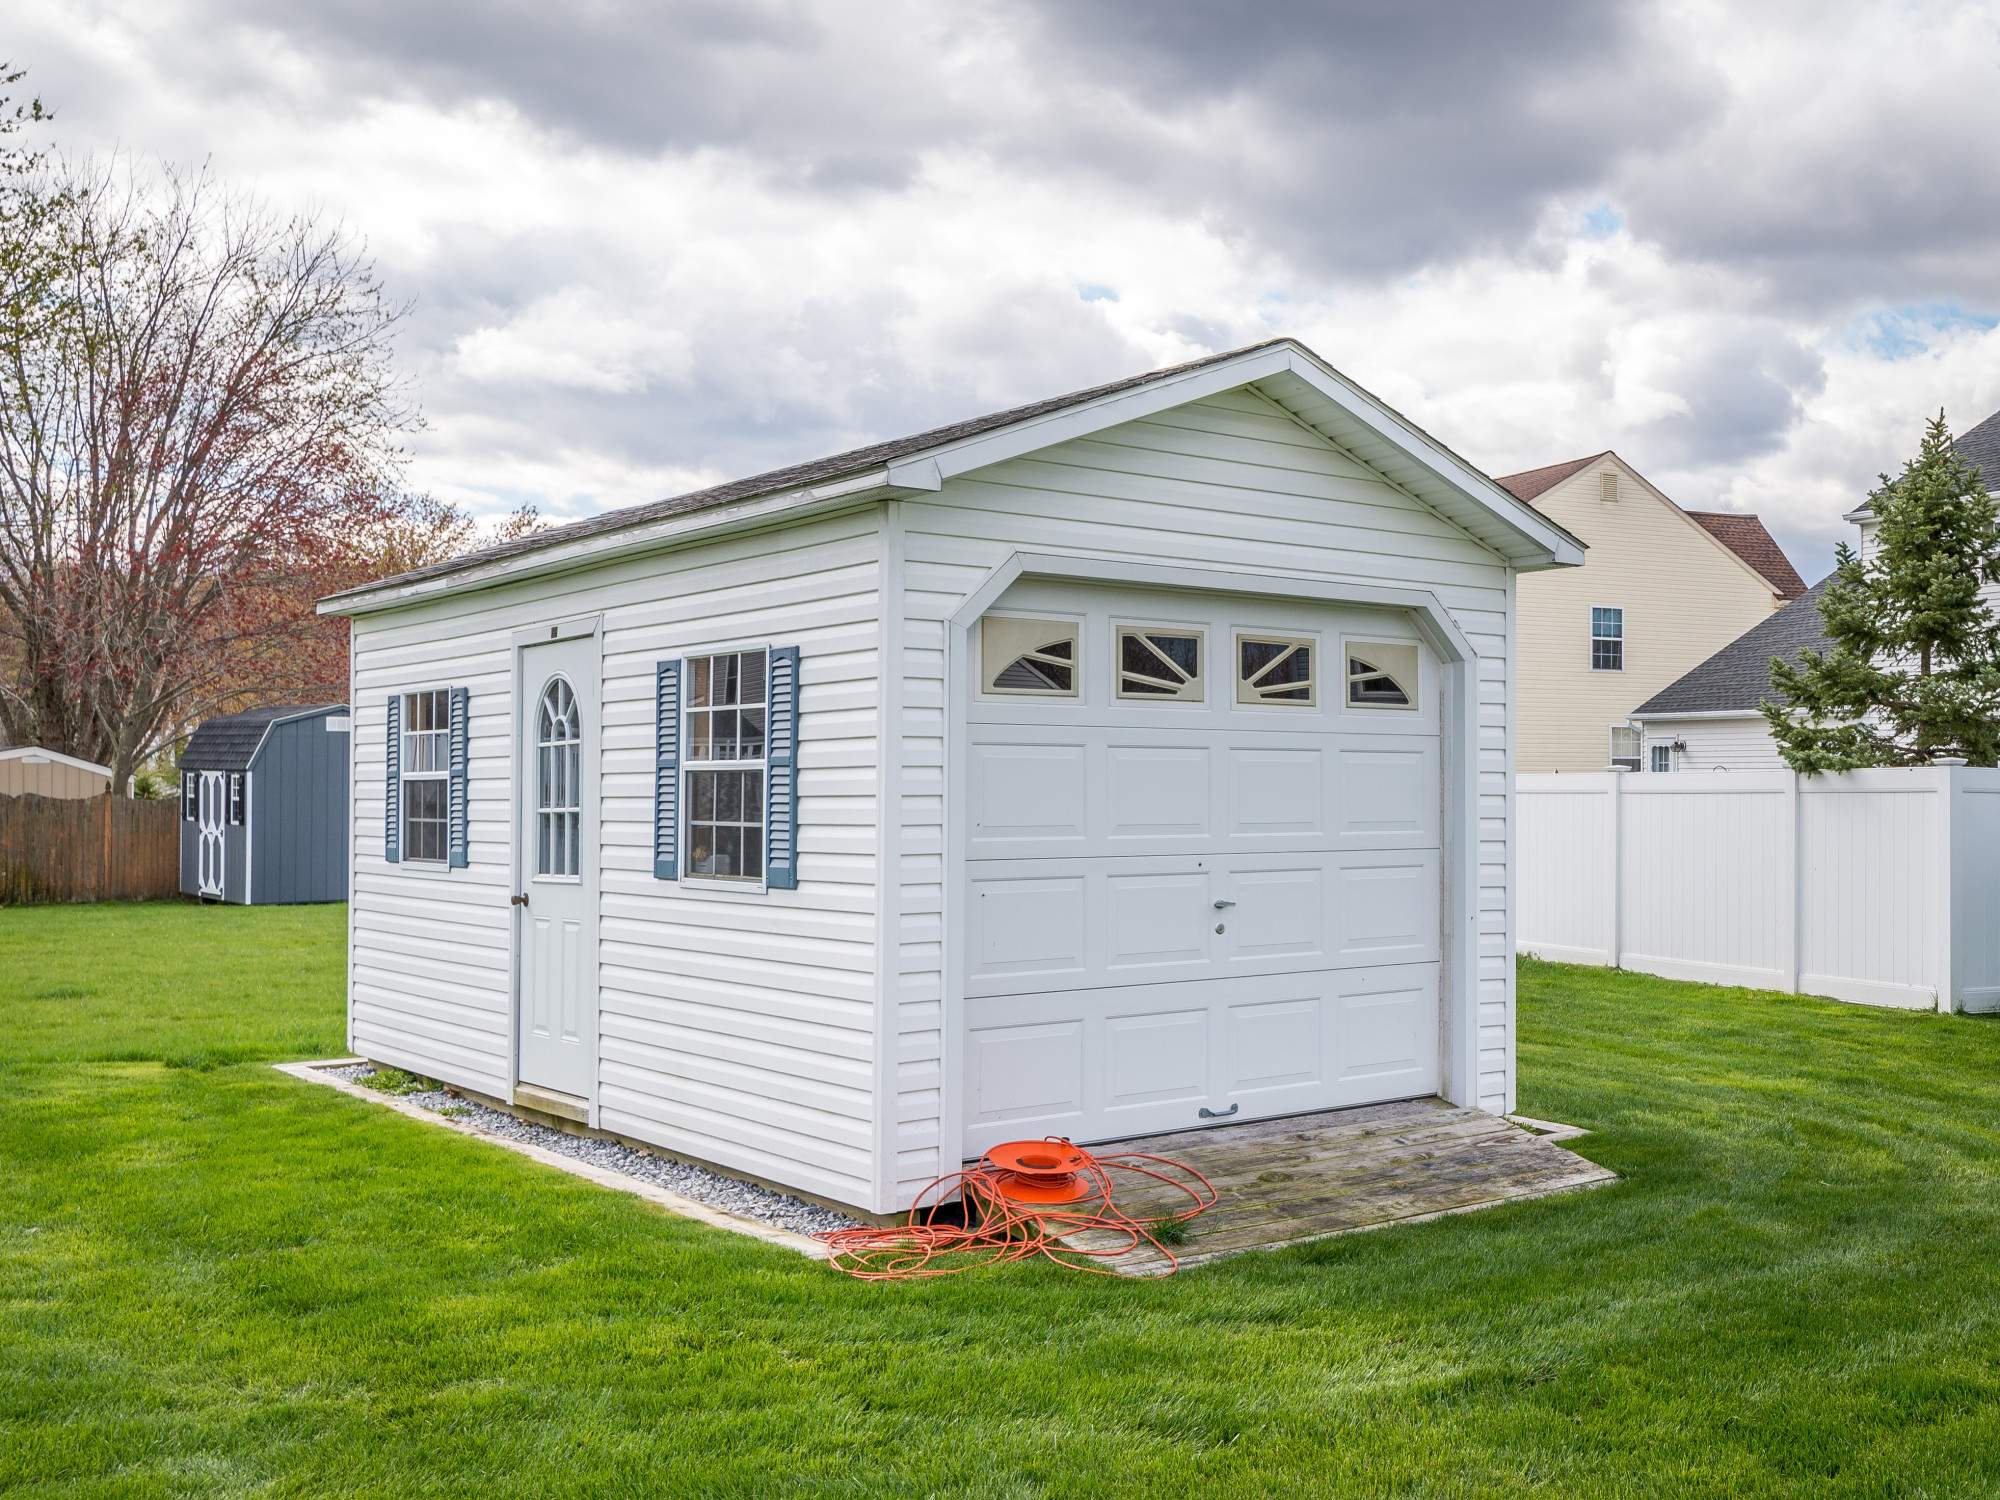 Wood Outdoor Storage Shed: What Are the Benefits of Purchasing One?